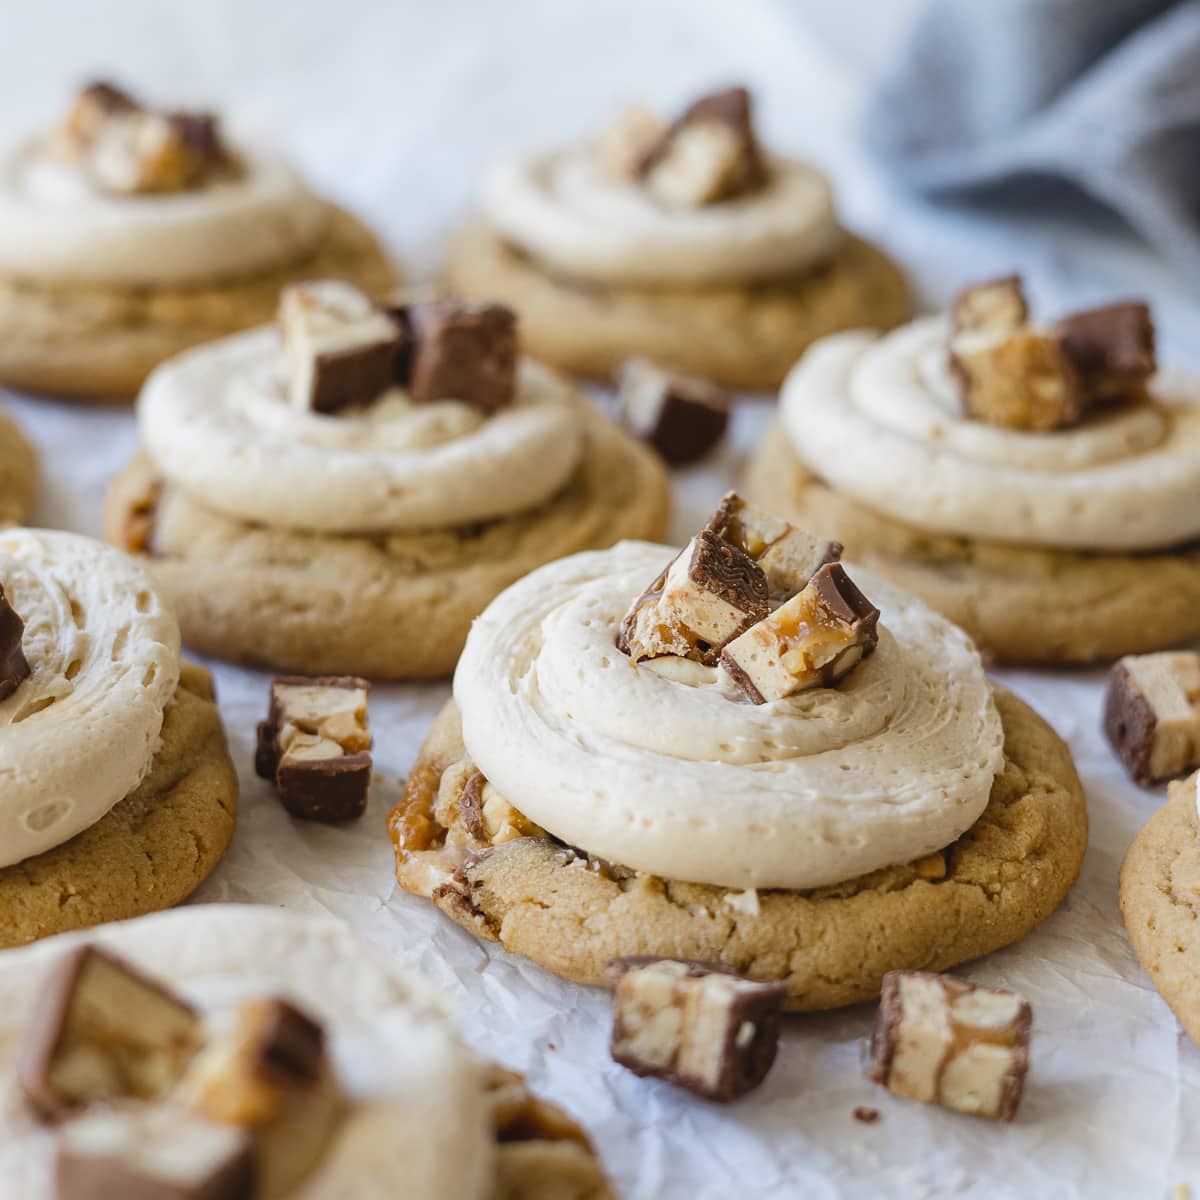 Peanut butter cookies frosted with caramel buttercream and chopped Snickers bars.